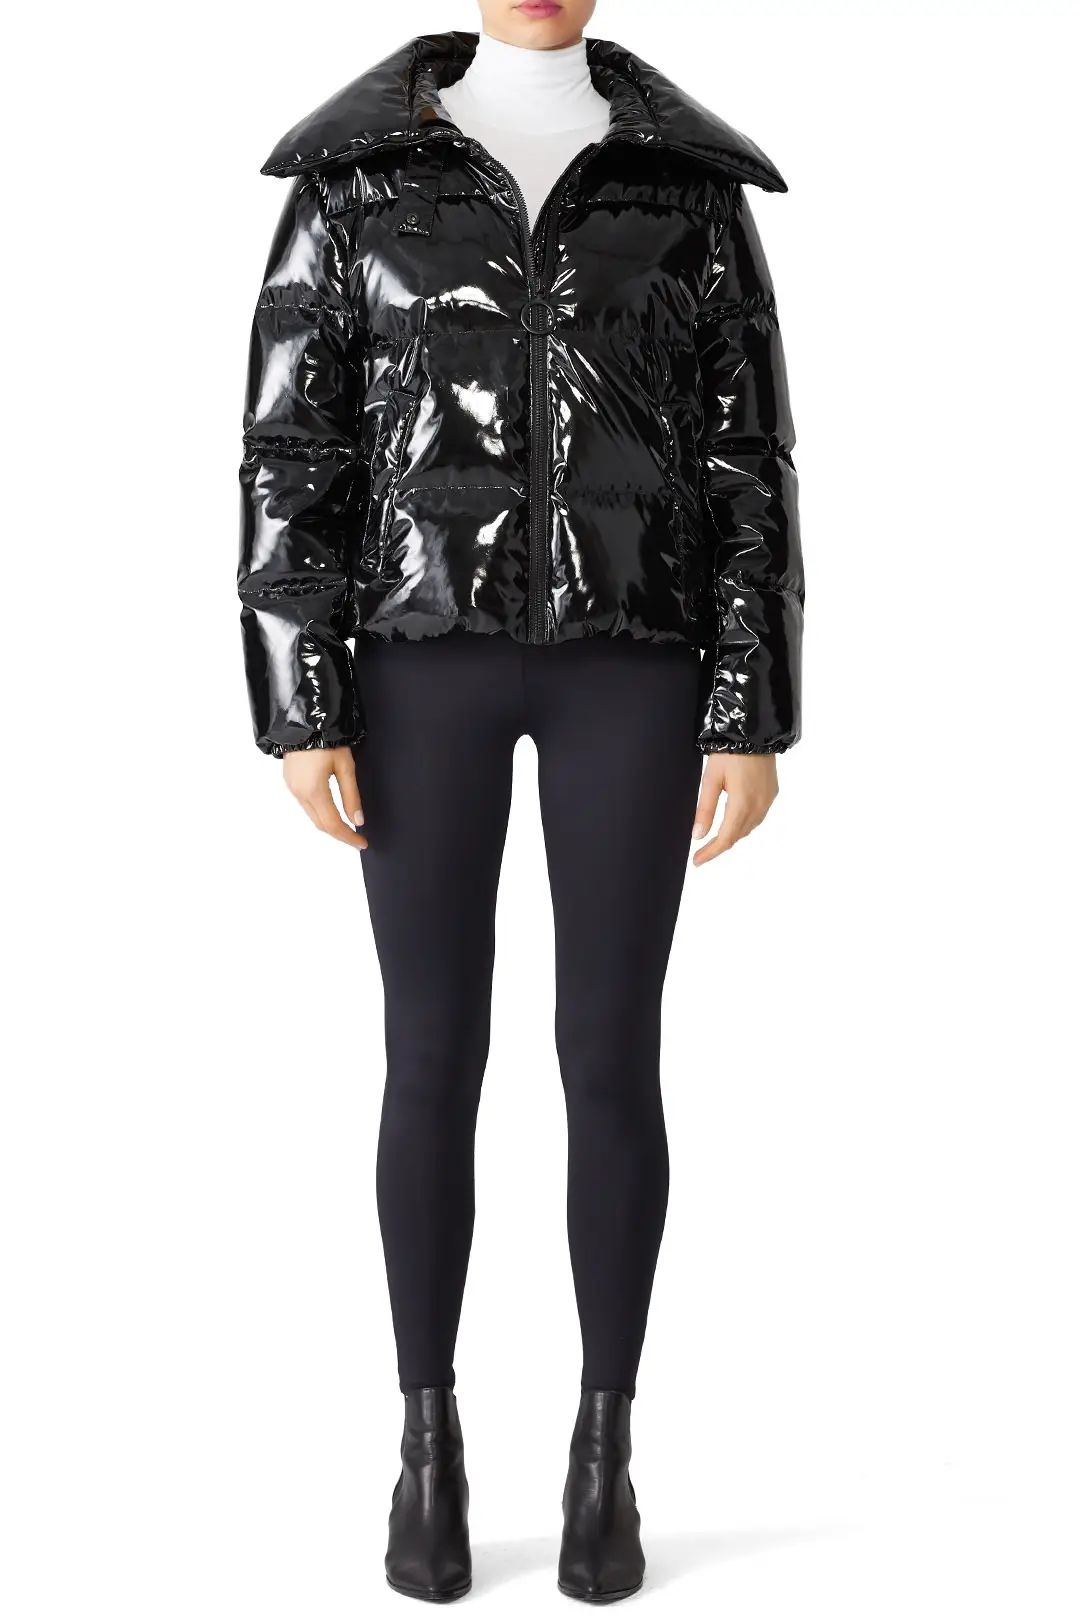 KENDALL + KYLIE Shiny Black Puffer Coat | Rent The Runway